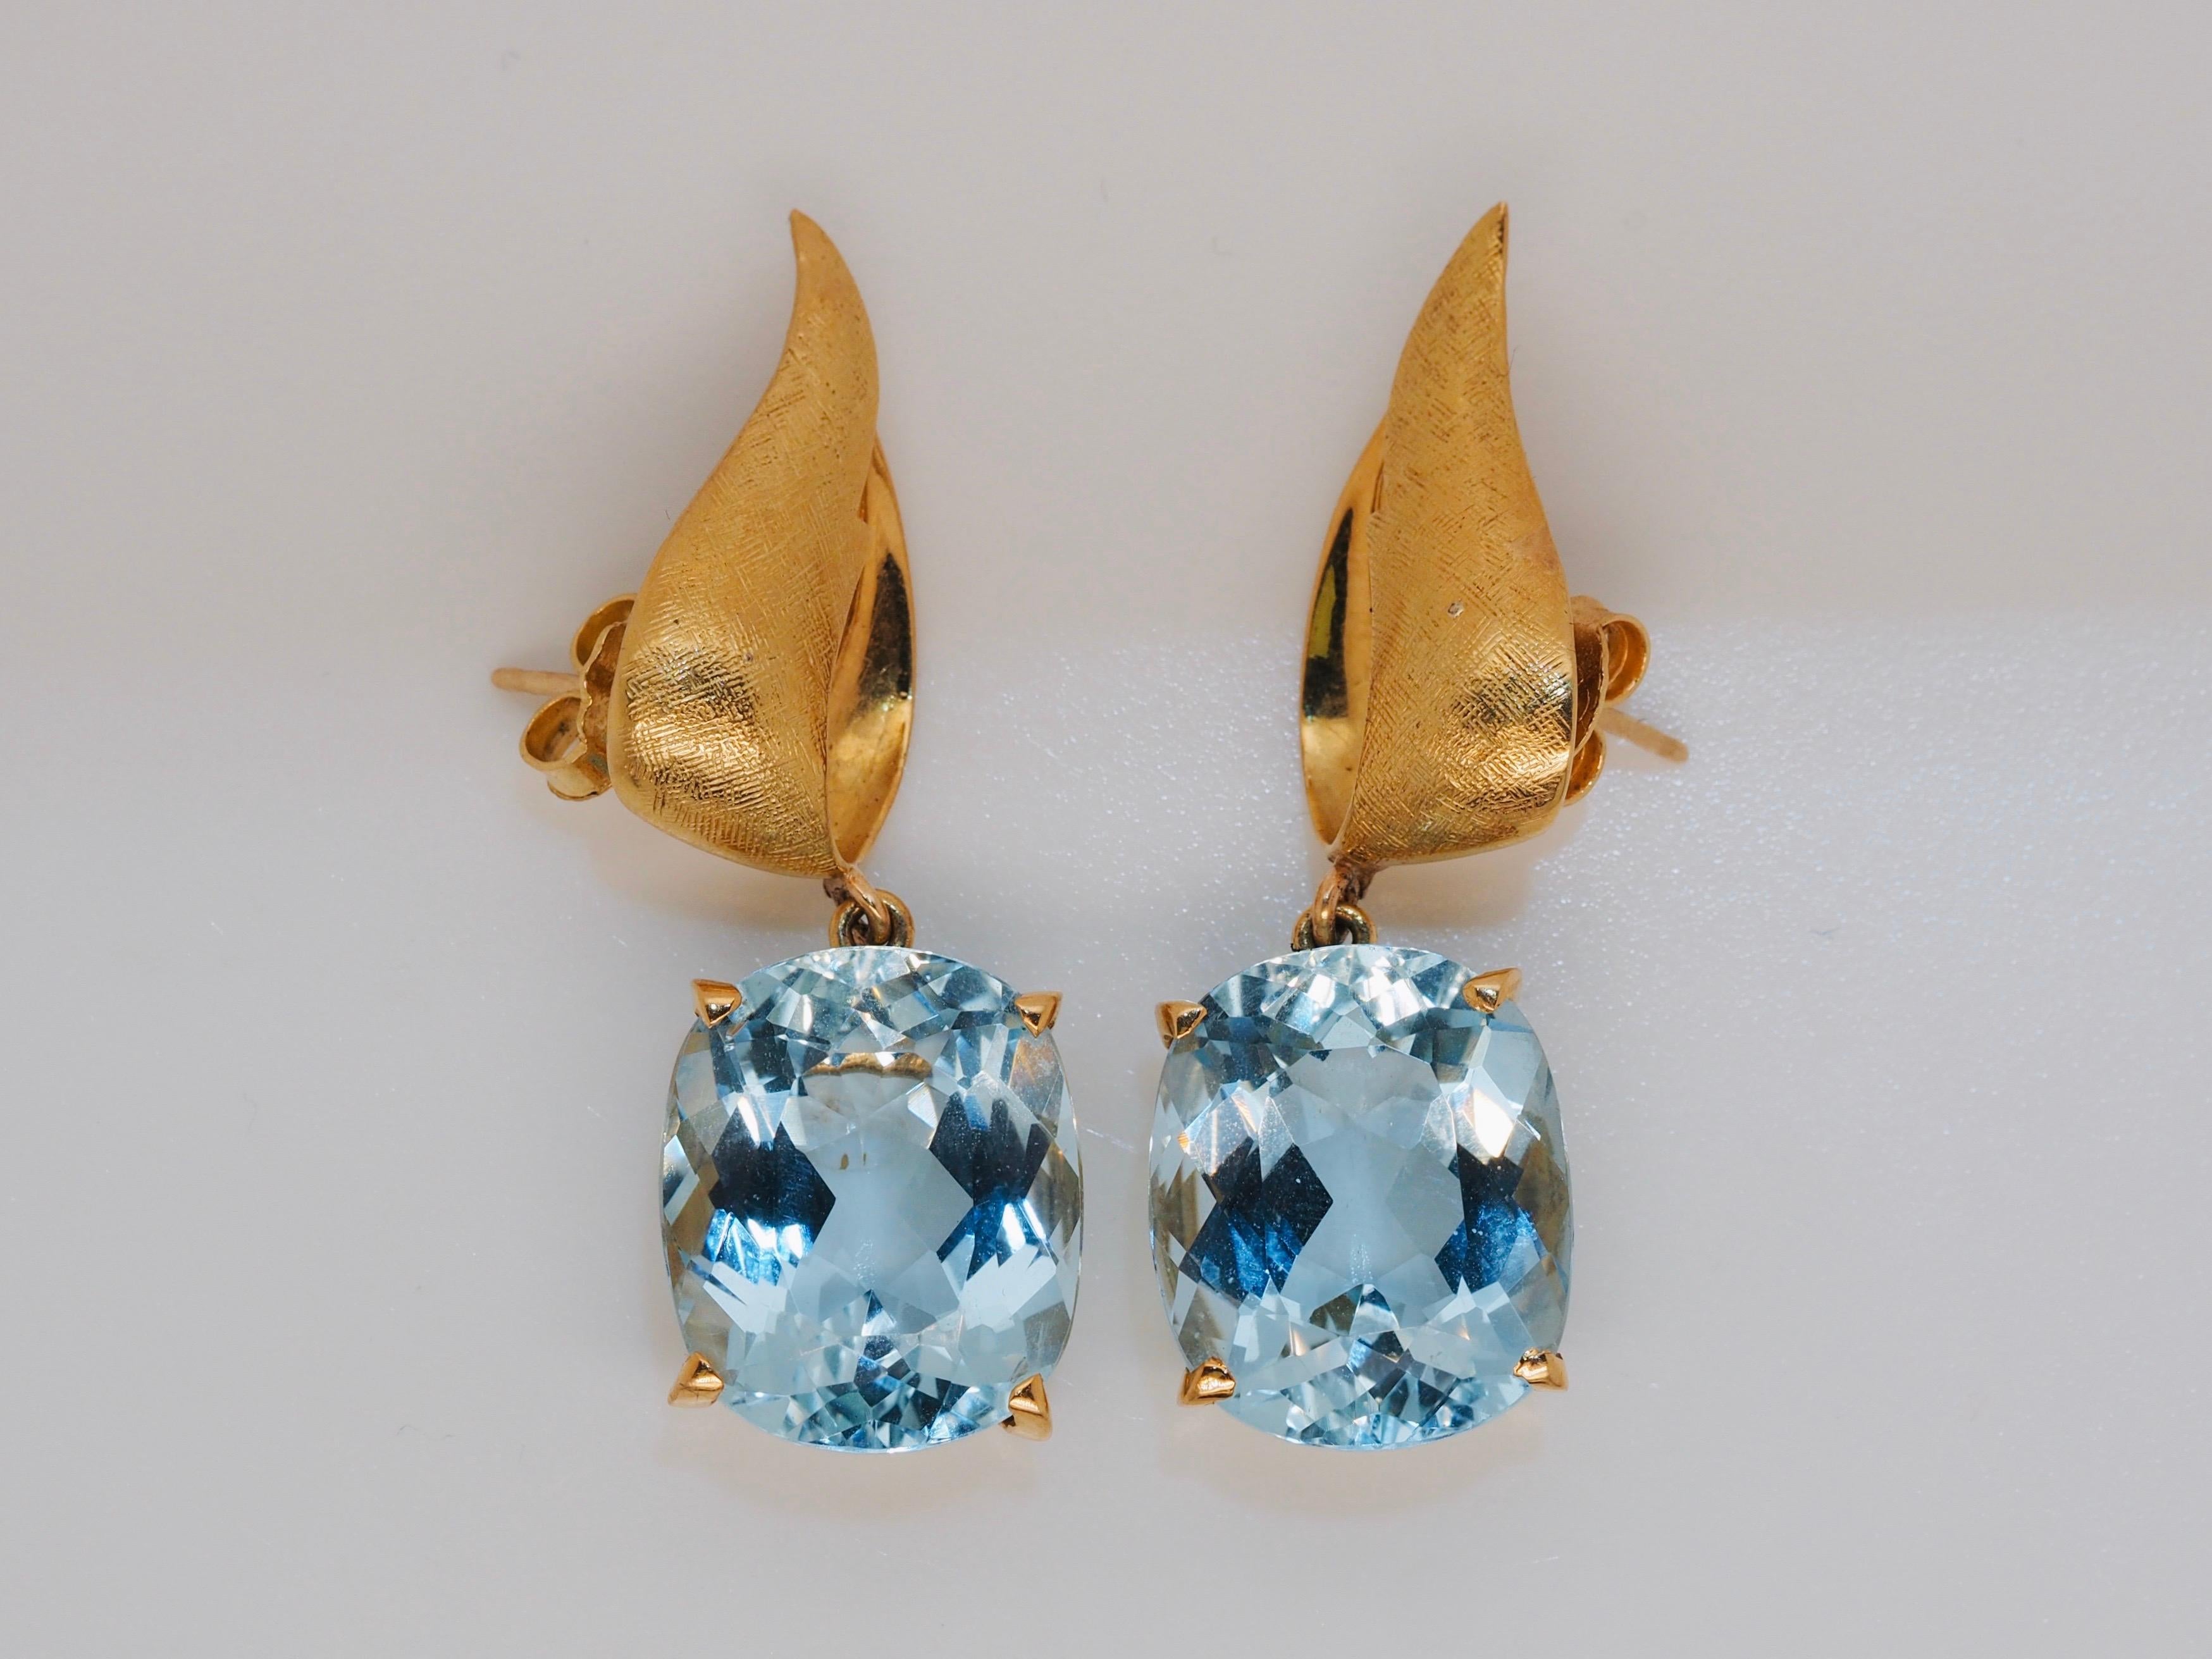 These incredible Vintage- Retro large aquamarine dangle earrings are exquisite and date back to the 1940's. The natural oval aquamarines weigh 28.00 carats total and measure 17.7 x 14.8 x 9.00 MM each. The aquamarines are set in 14 karat yellow